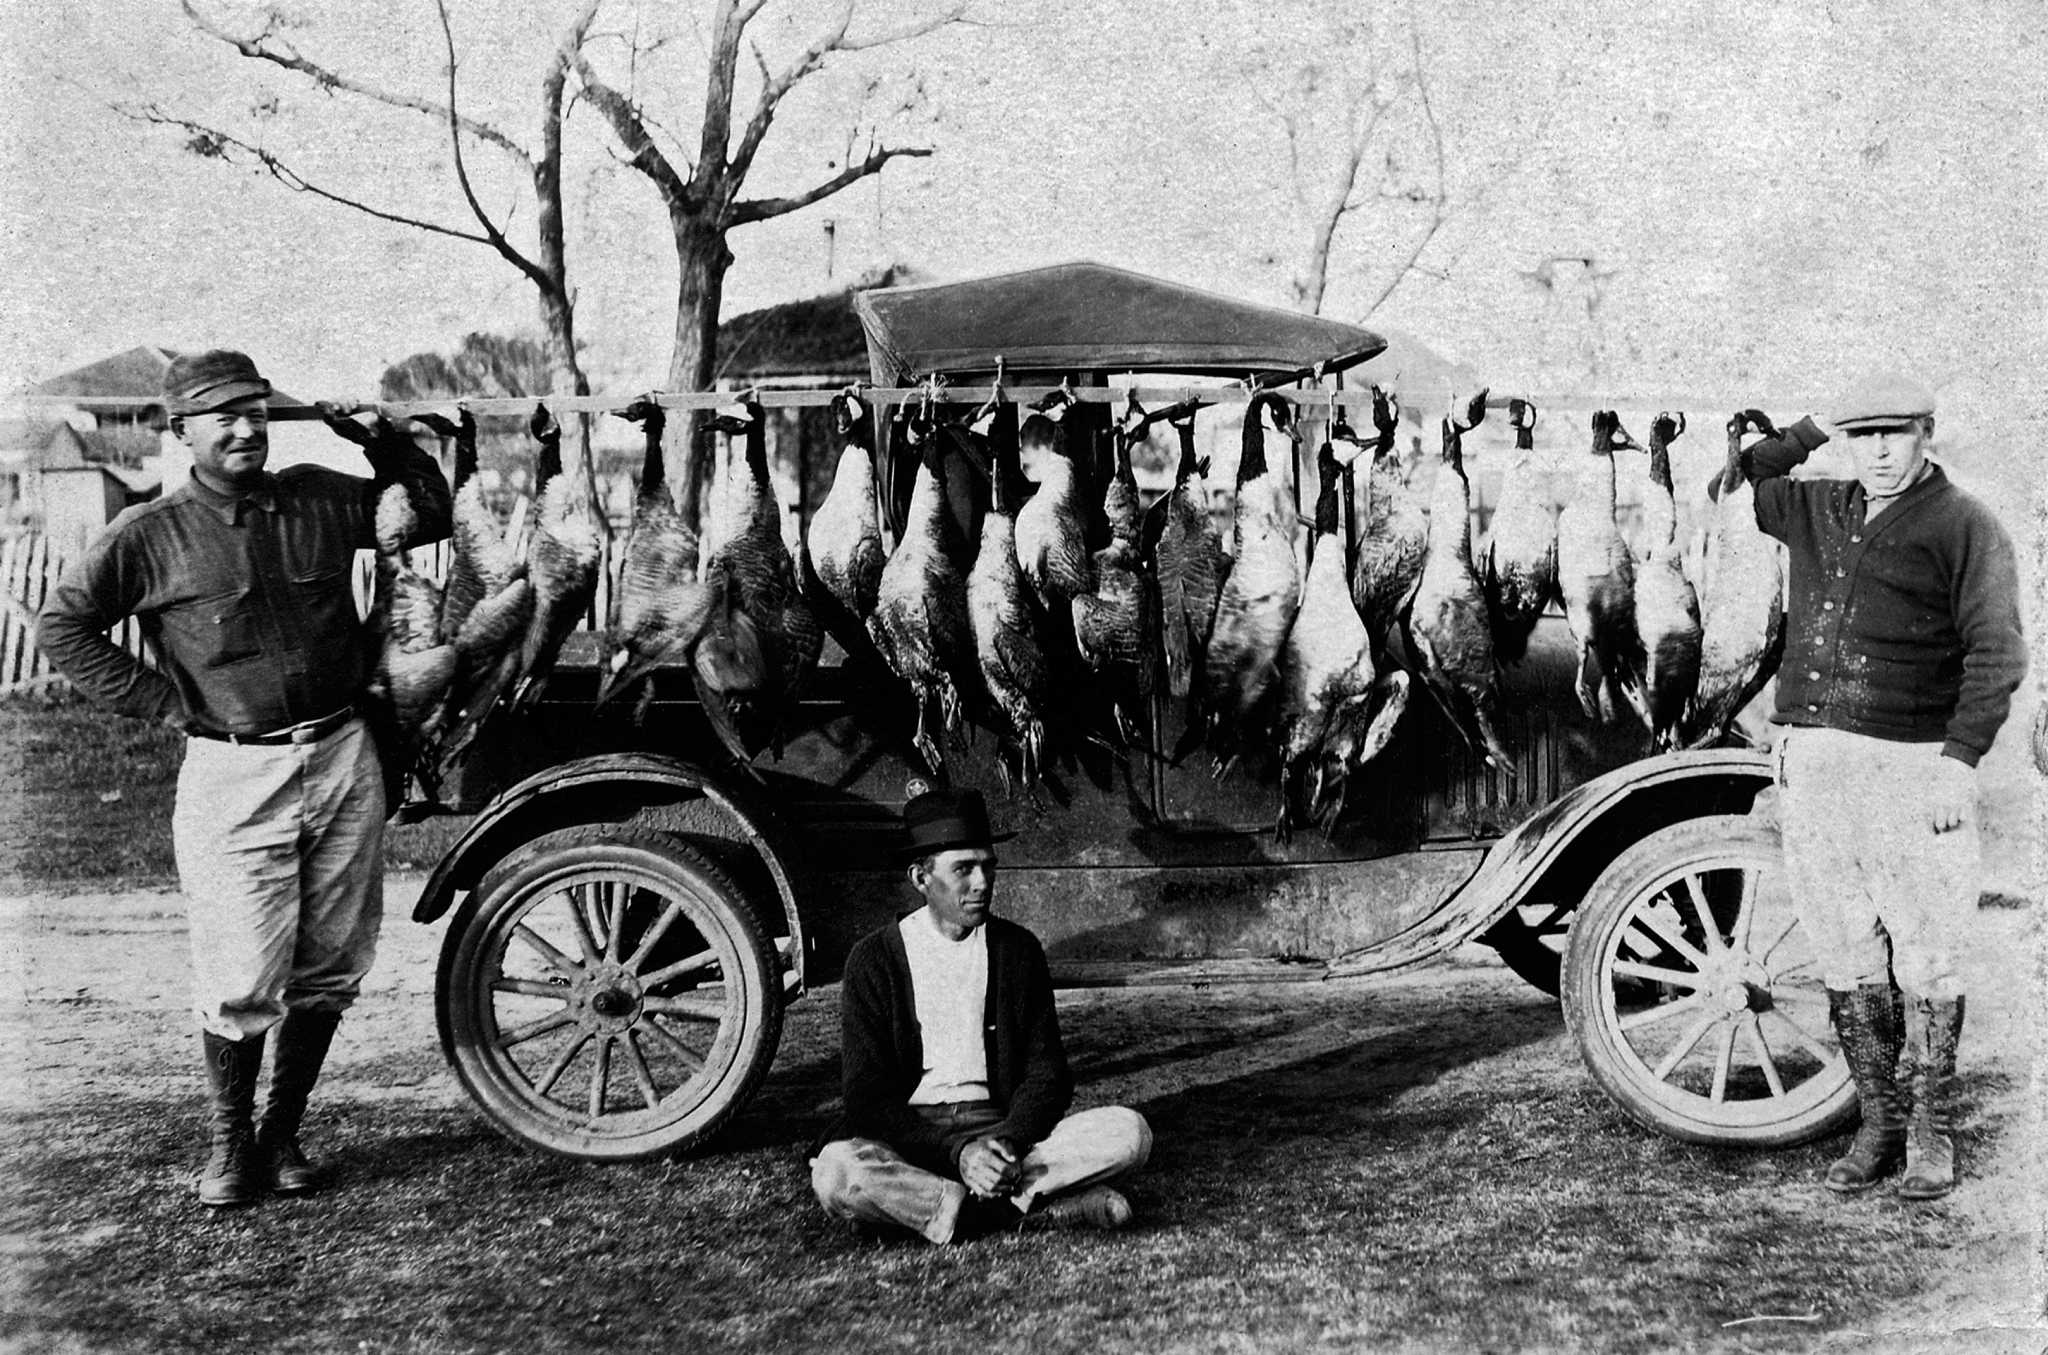 Author tells tale of Texas' waterfowl from decades past